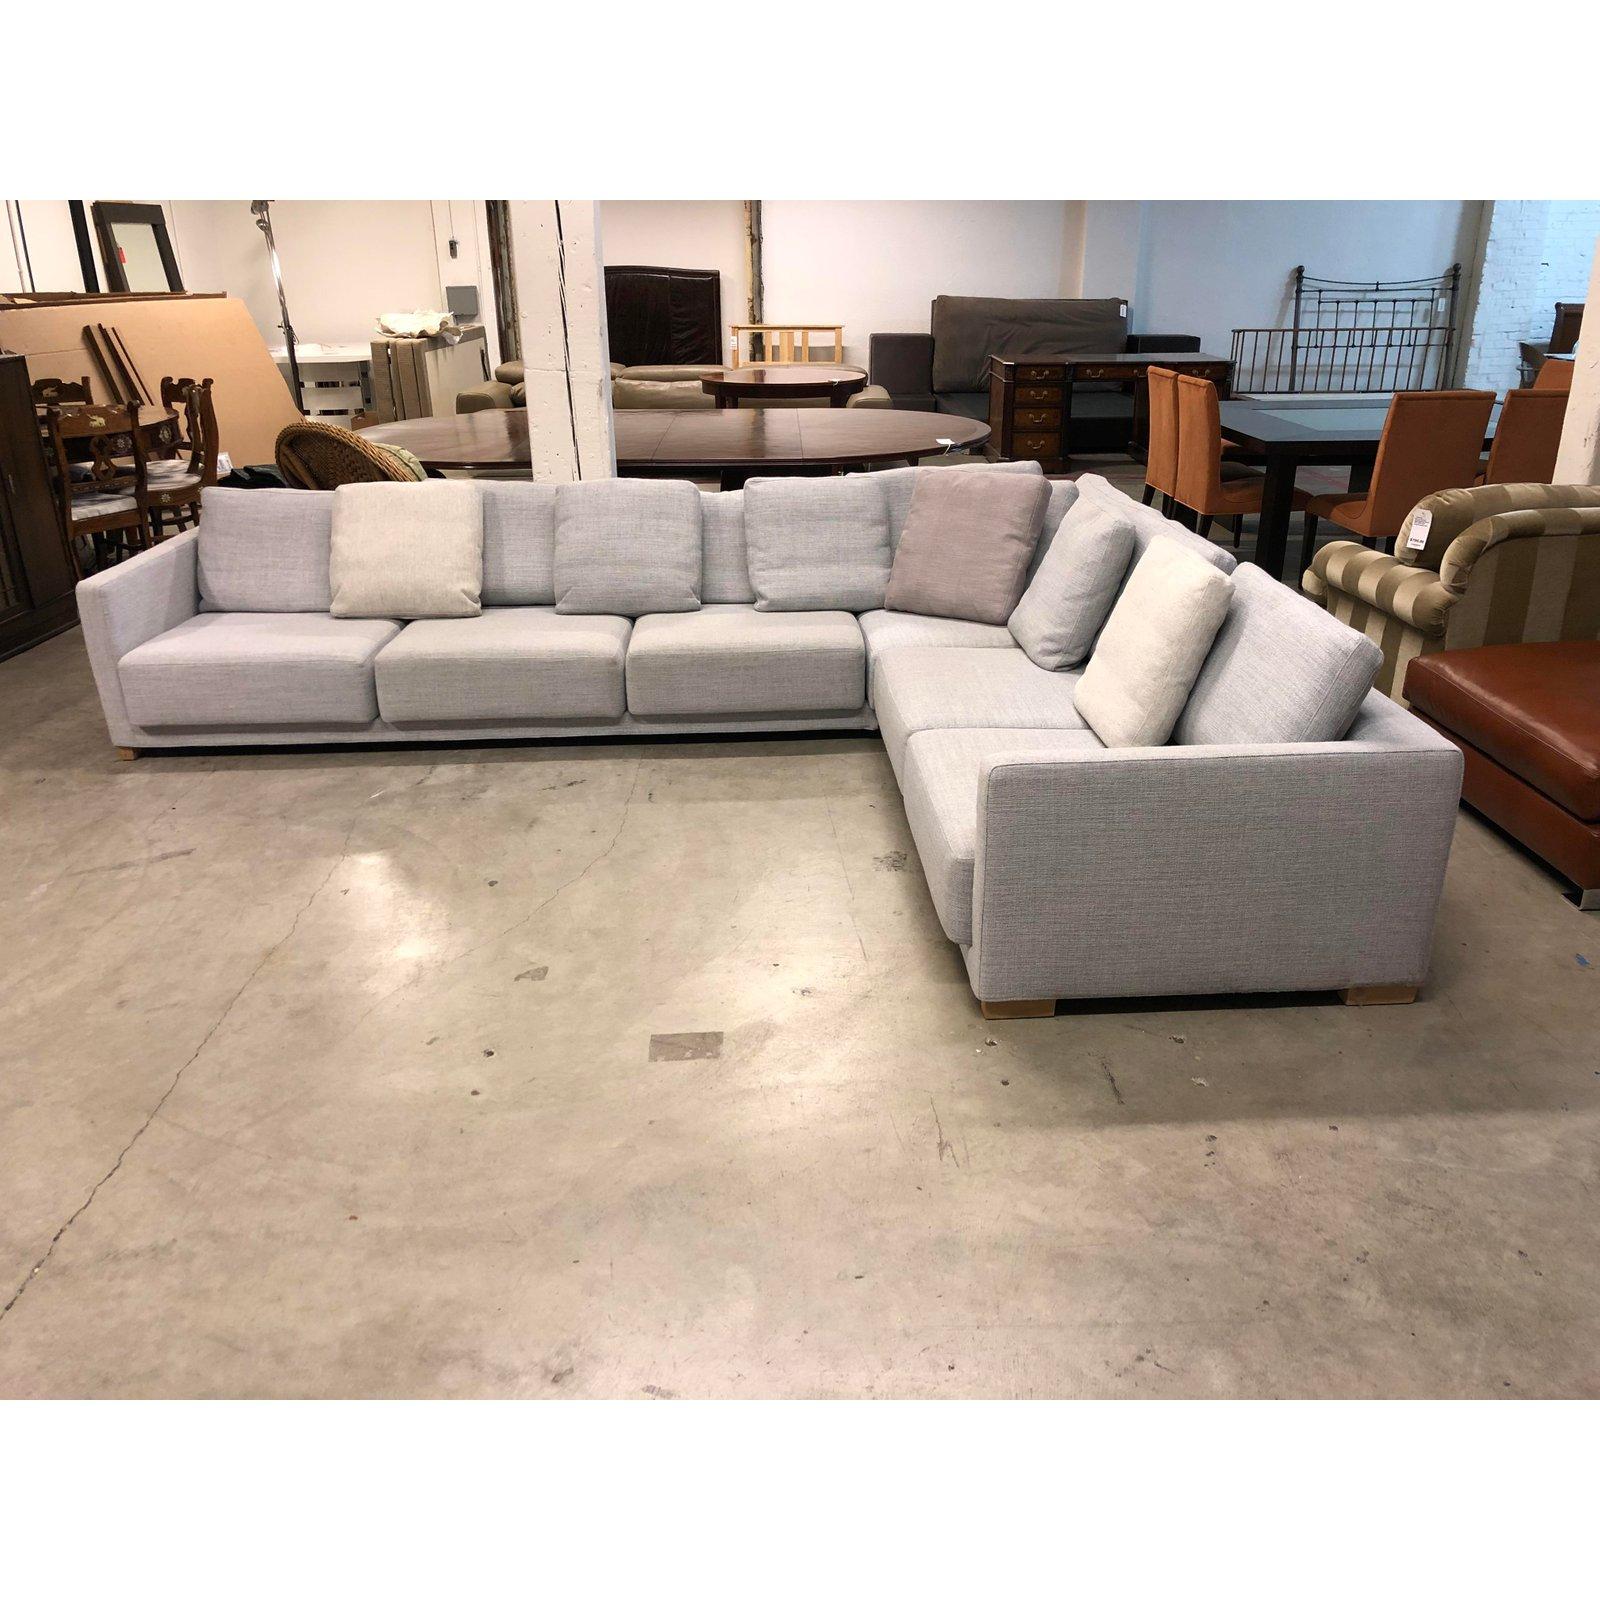 The drop in sectional by Bensen Inc. This design combines simplicity with a new method of furniture construction with design simplicity. The contemporary frame has a thin profile contrasted by large cushions, for timeless appeal. Tundra gray